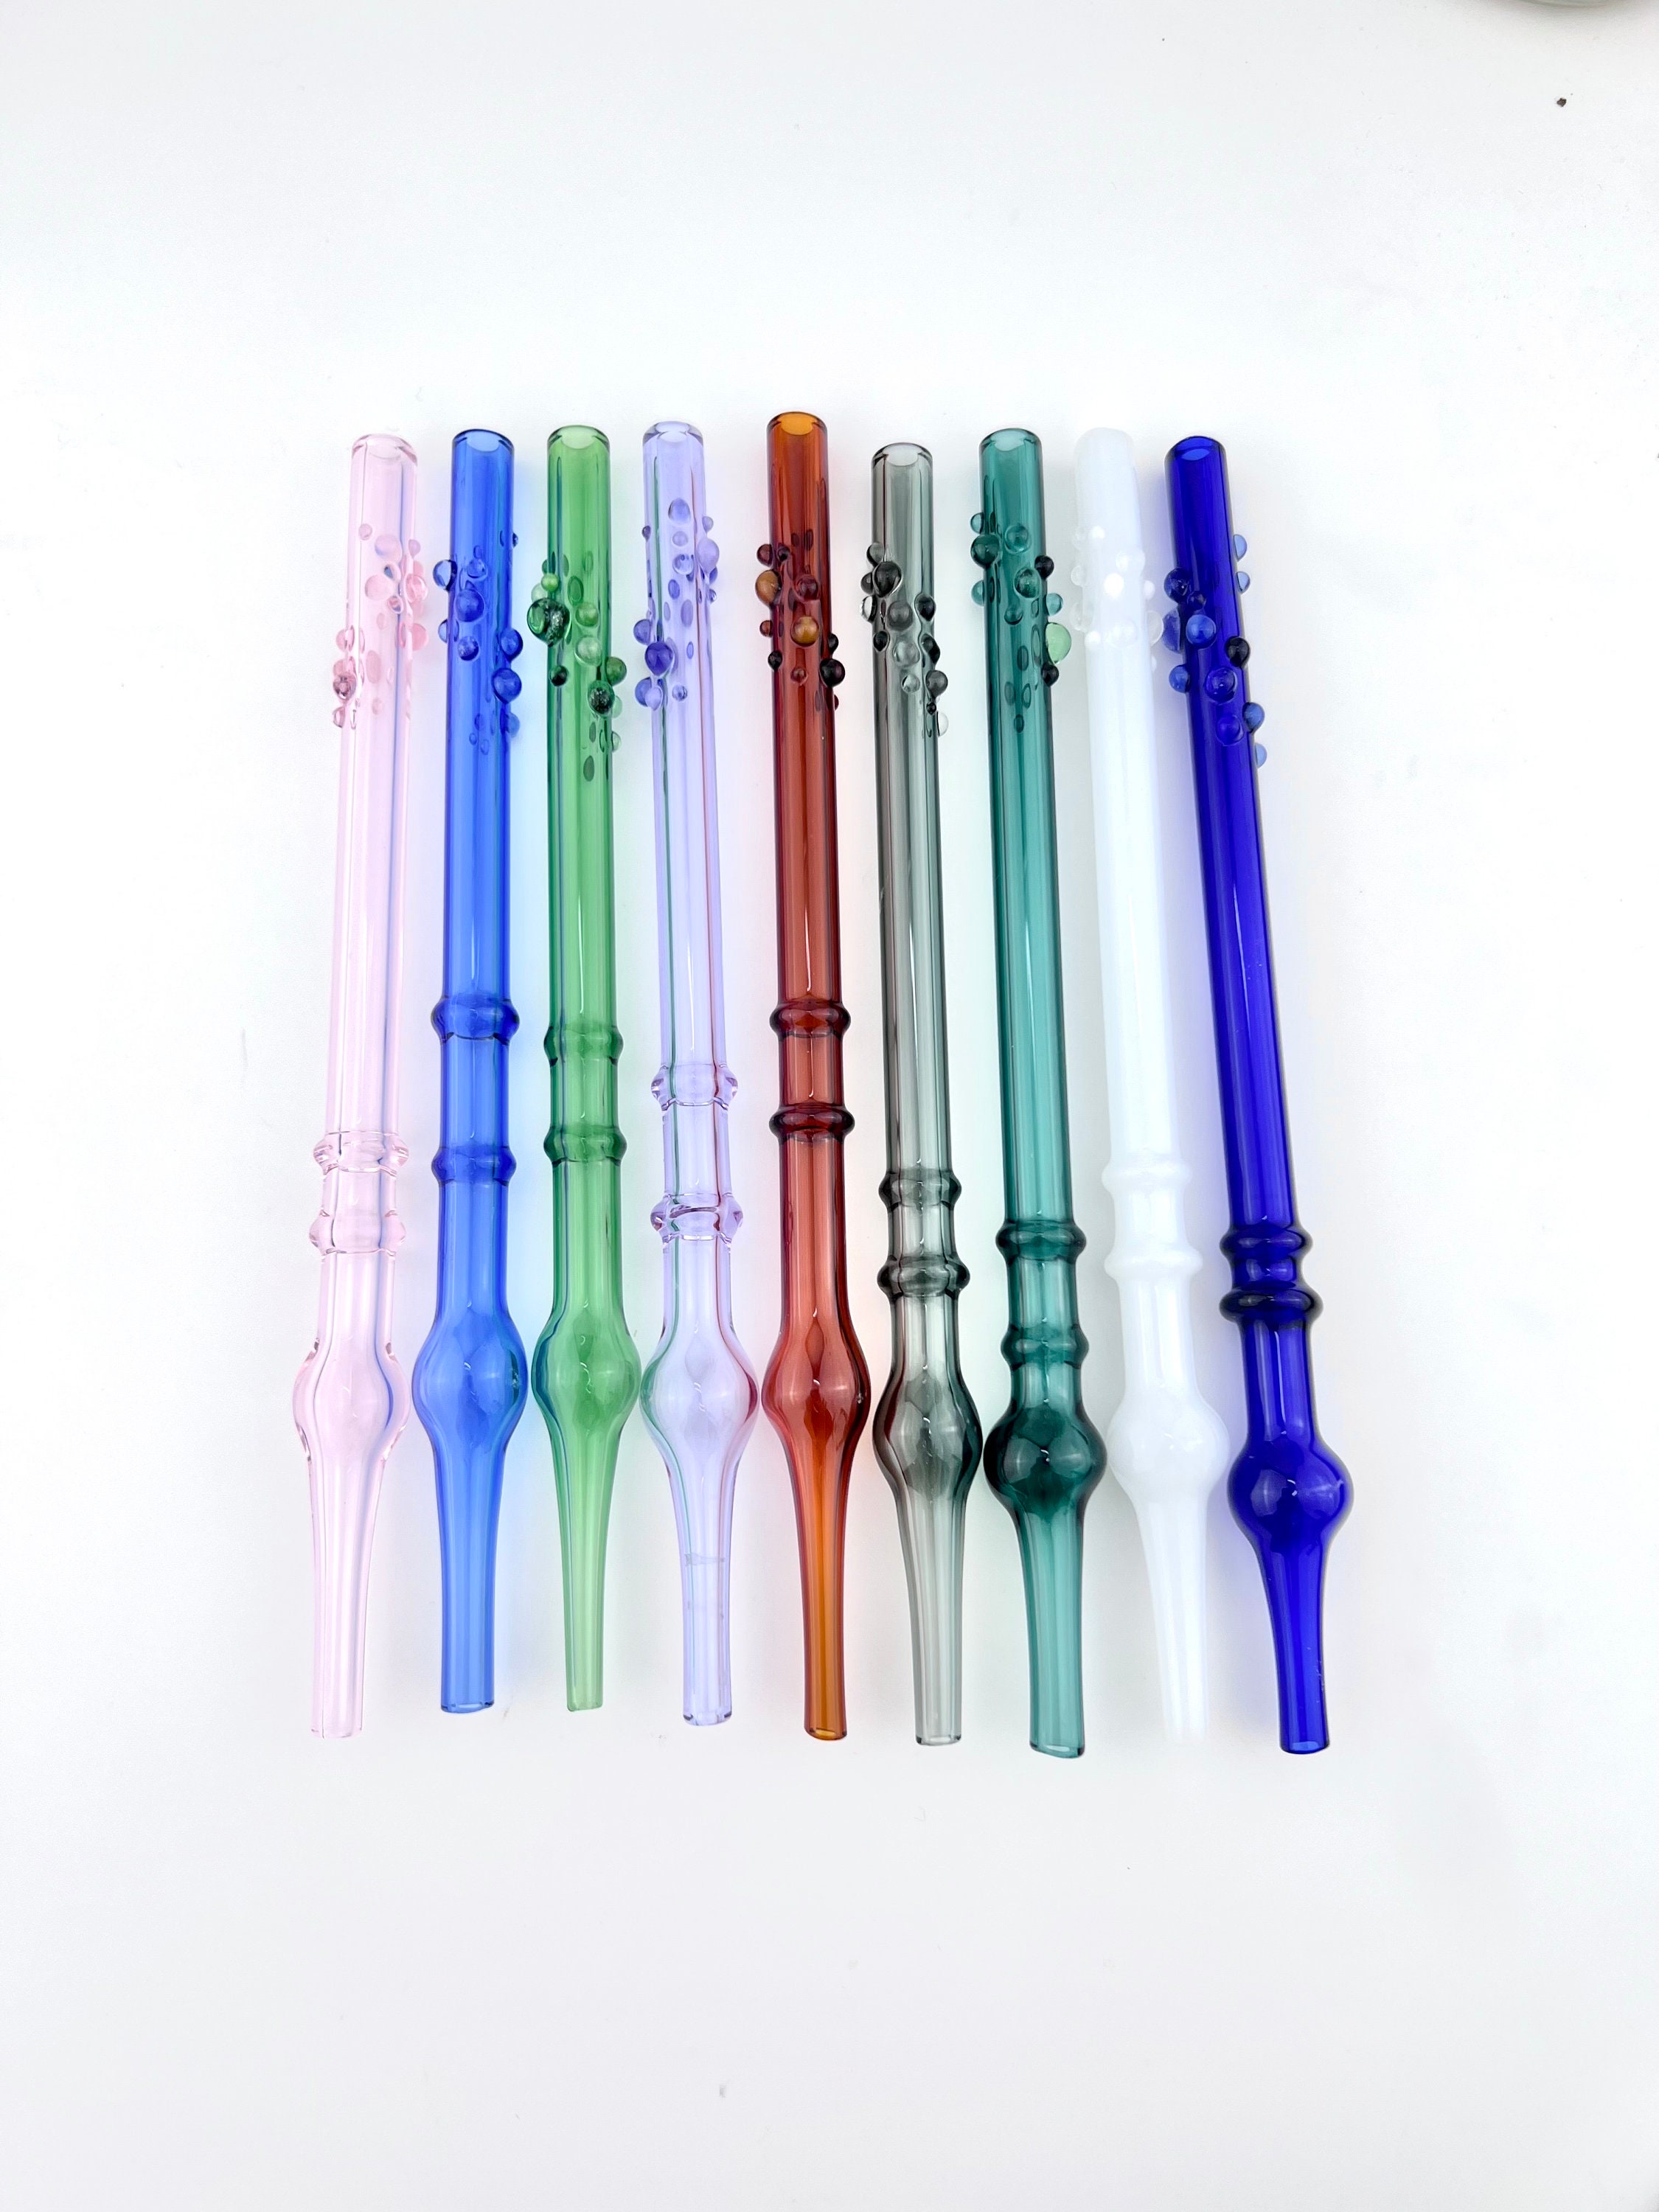 Glass Nectar Collector DAB Straw Oil Rigs for Smoking Pipe - China Nectar  Collector and Oil Rigs price